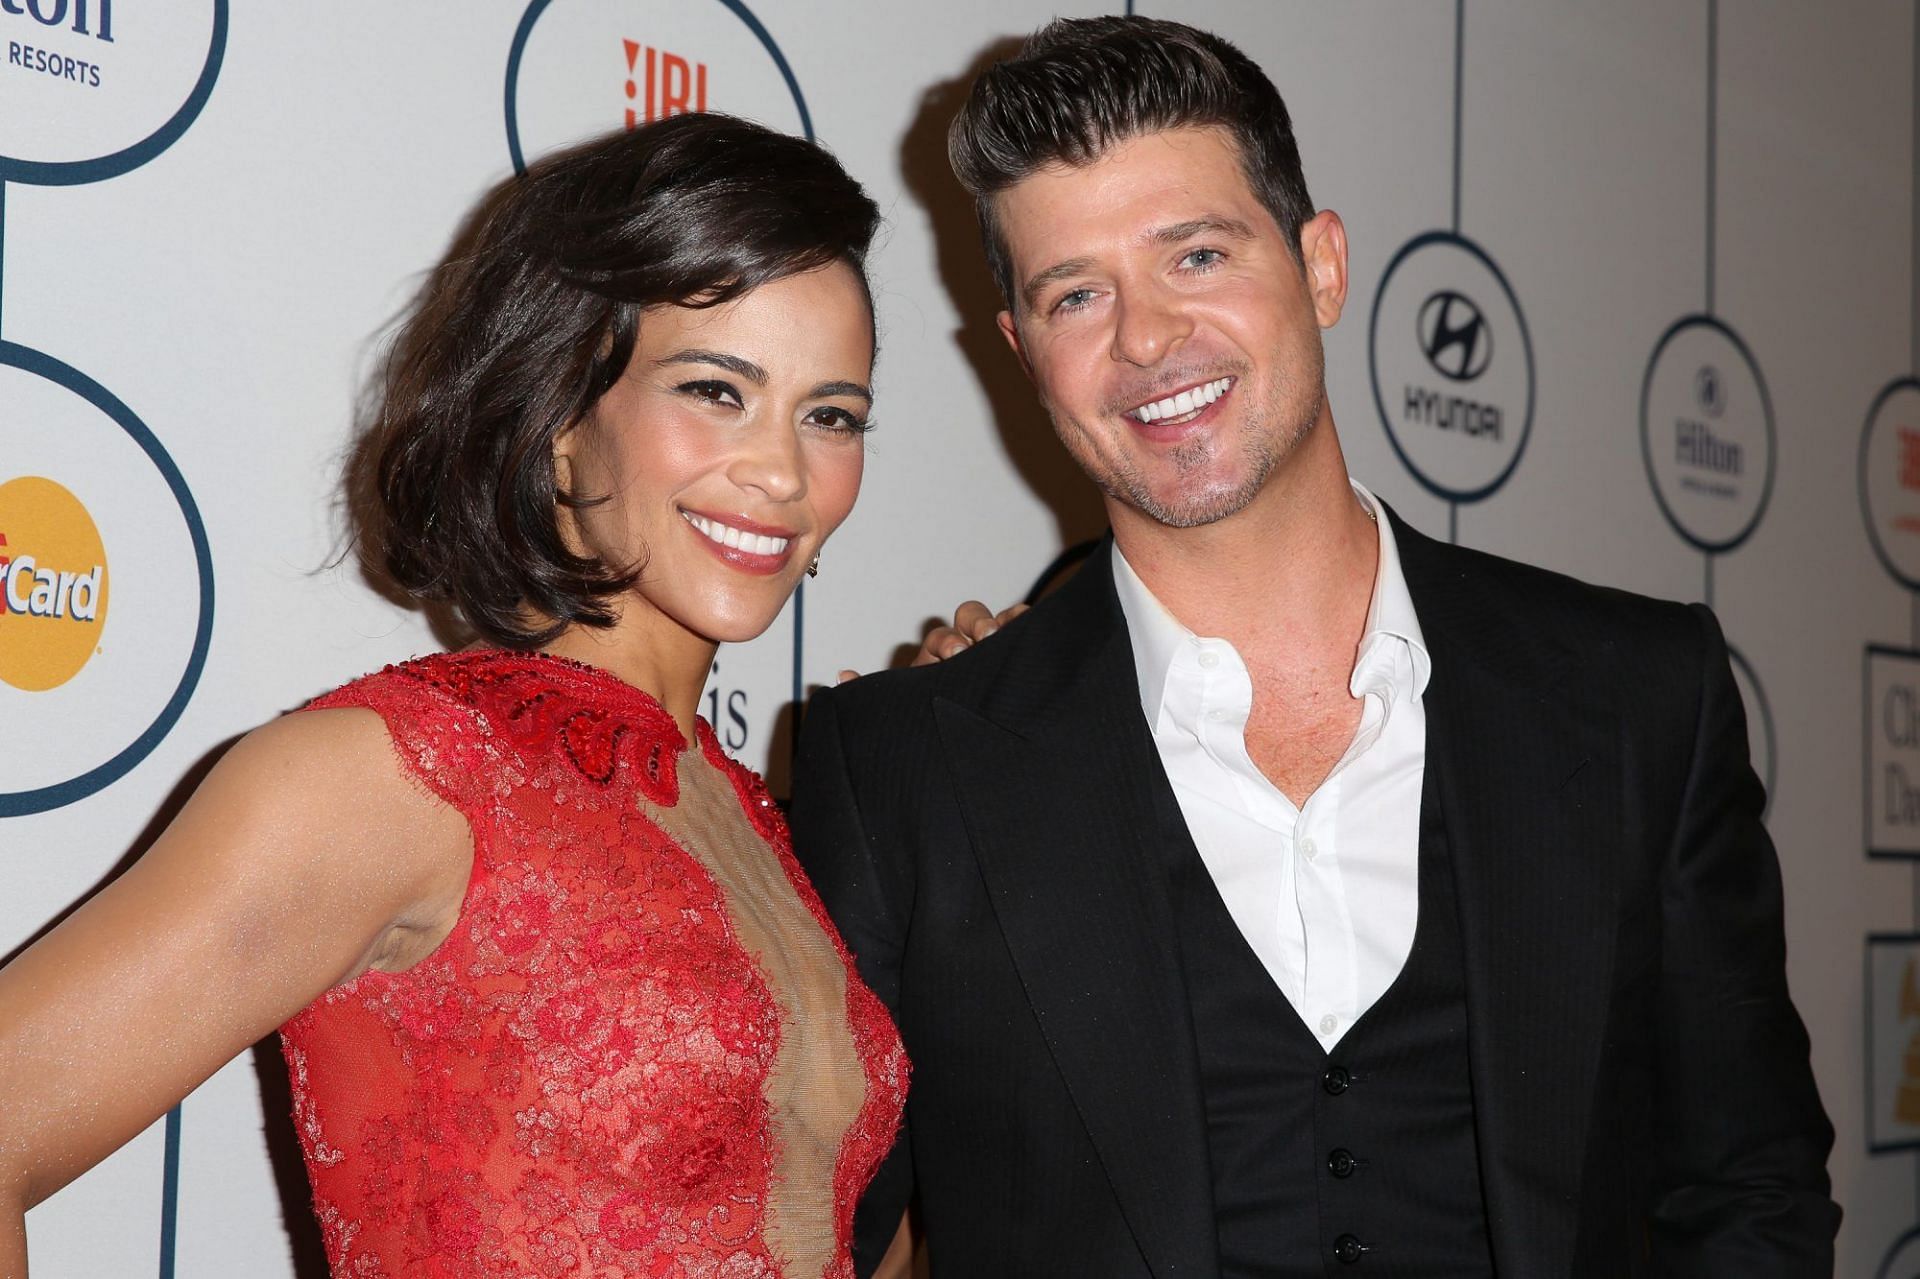 Paula Patton and Robin Thicke (Image via Chelsea Lauren/Getty Images)